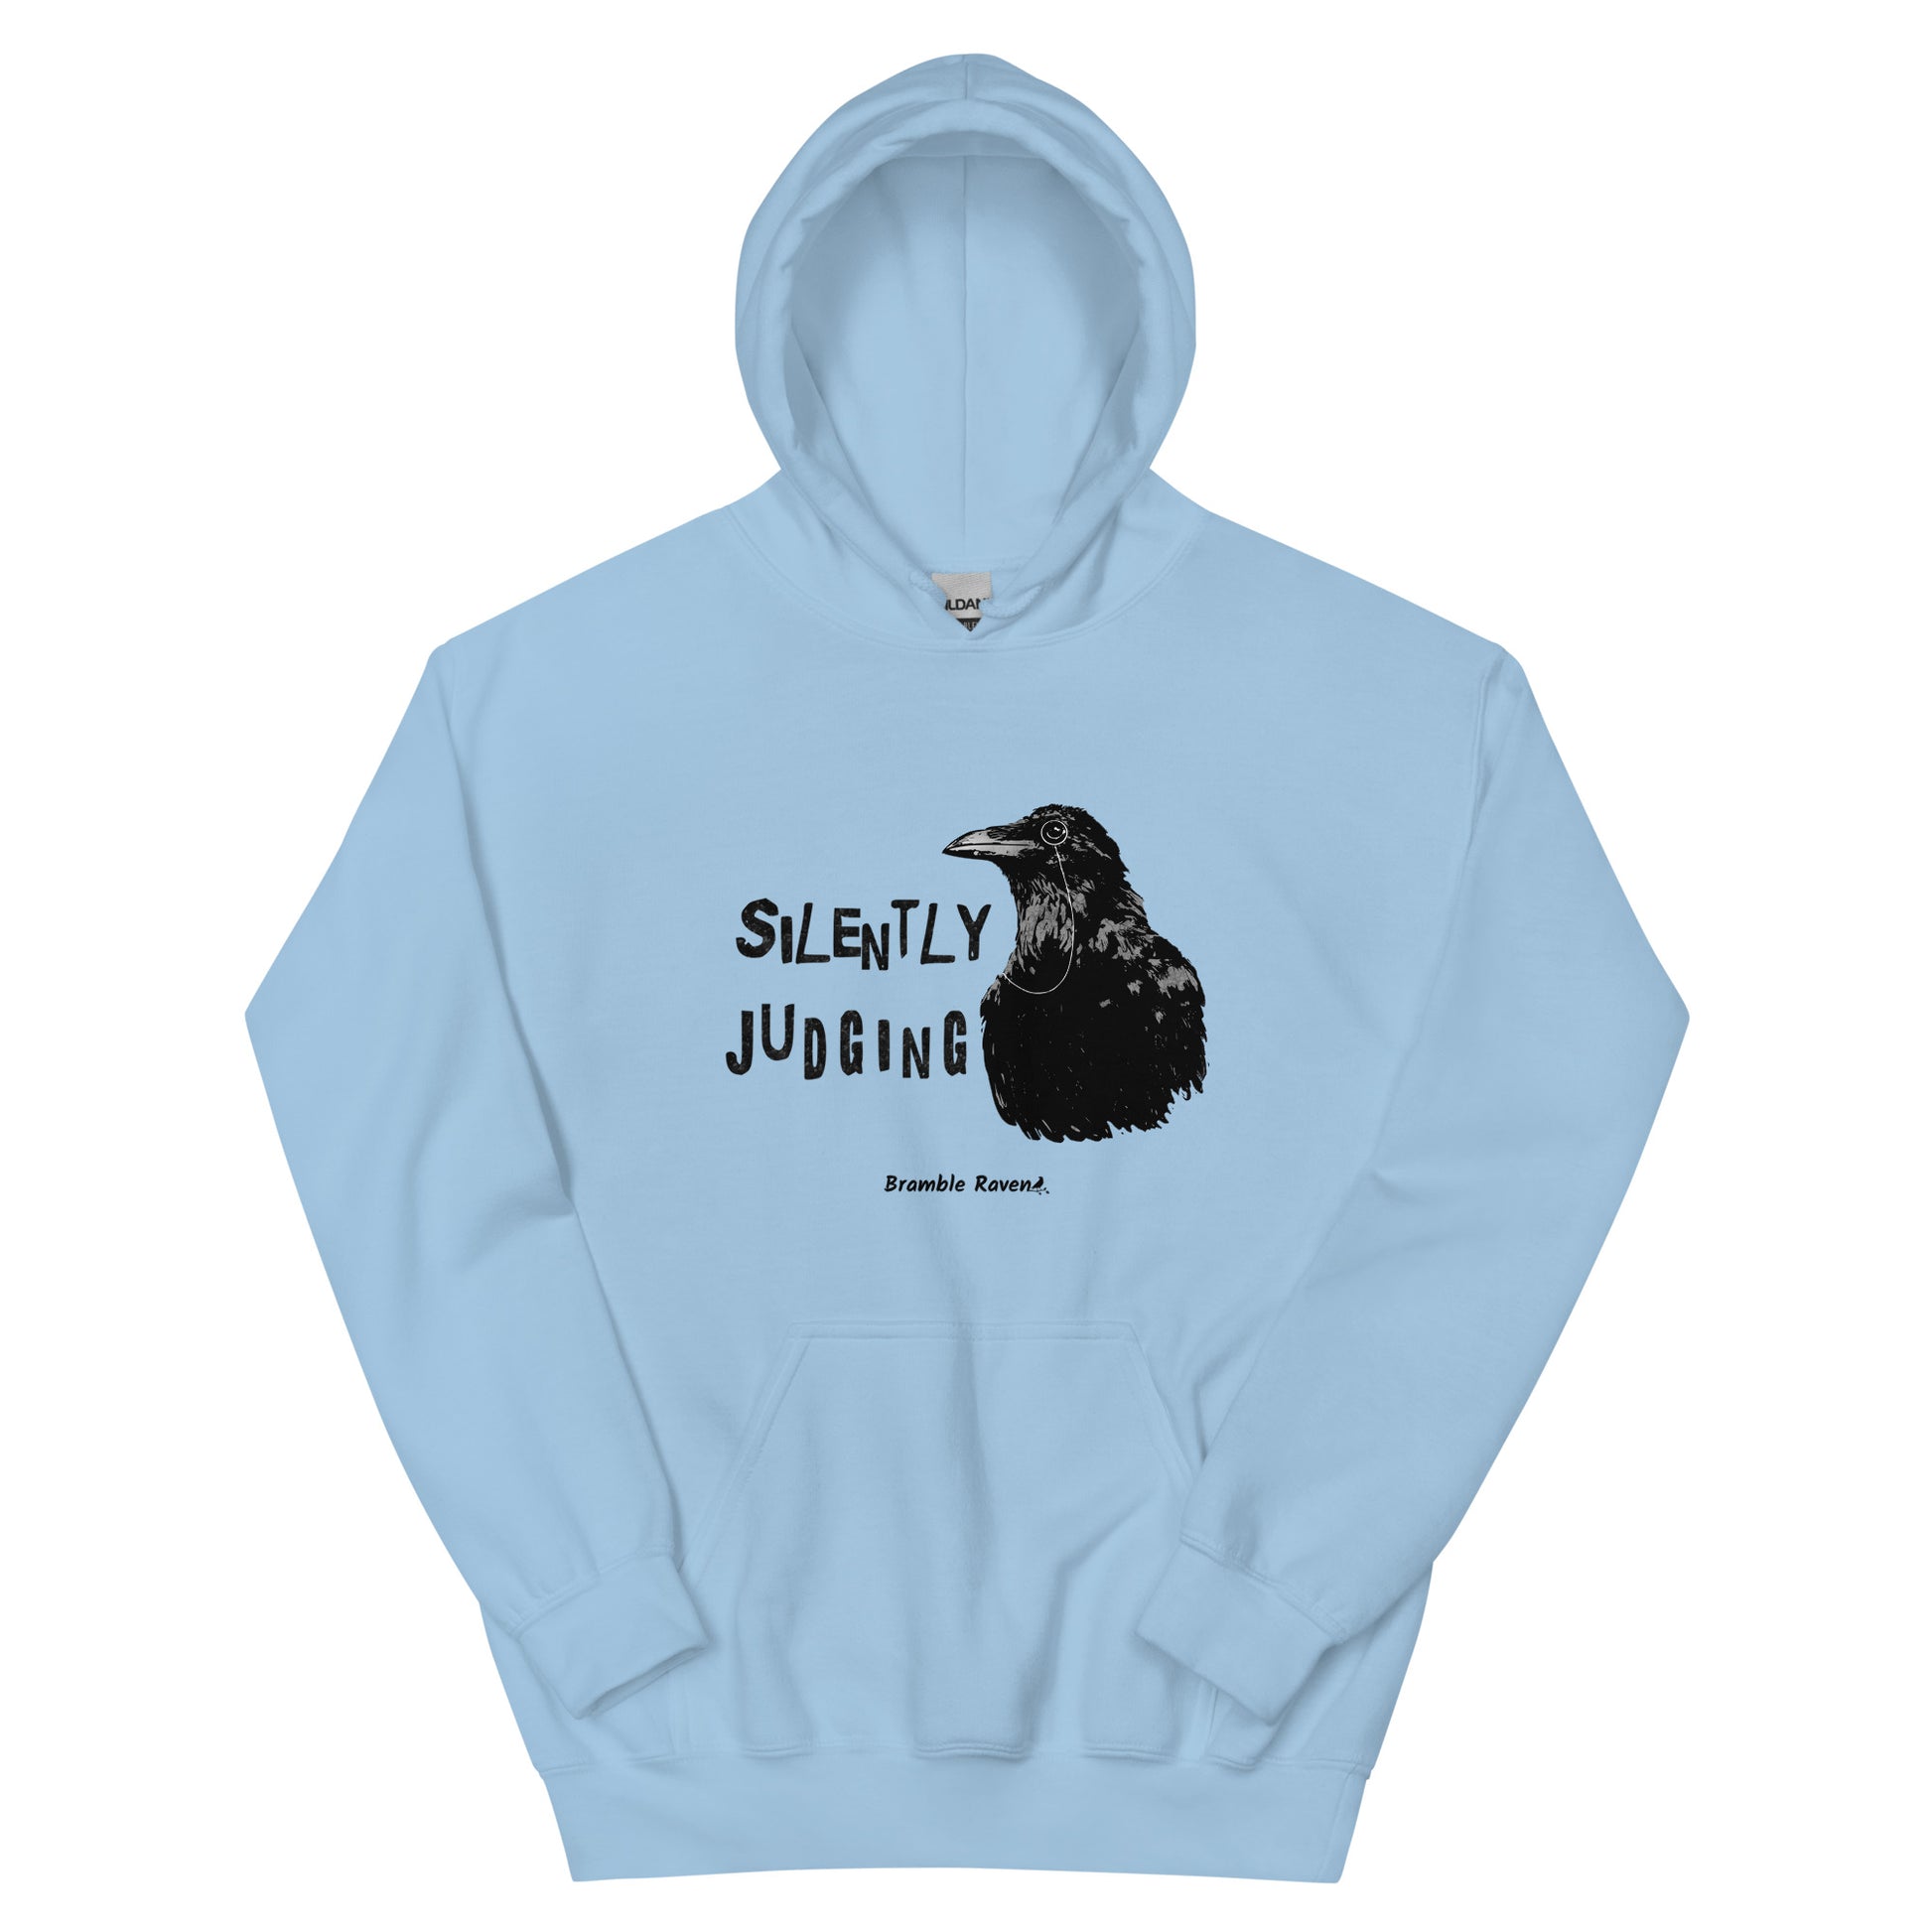 Unisex light blue colored hoodie with horizontal design of silently judging text by black crow wearing a monocle.  Design on the front of hoodie. Features double-lined hood and front pouch pocket.